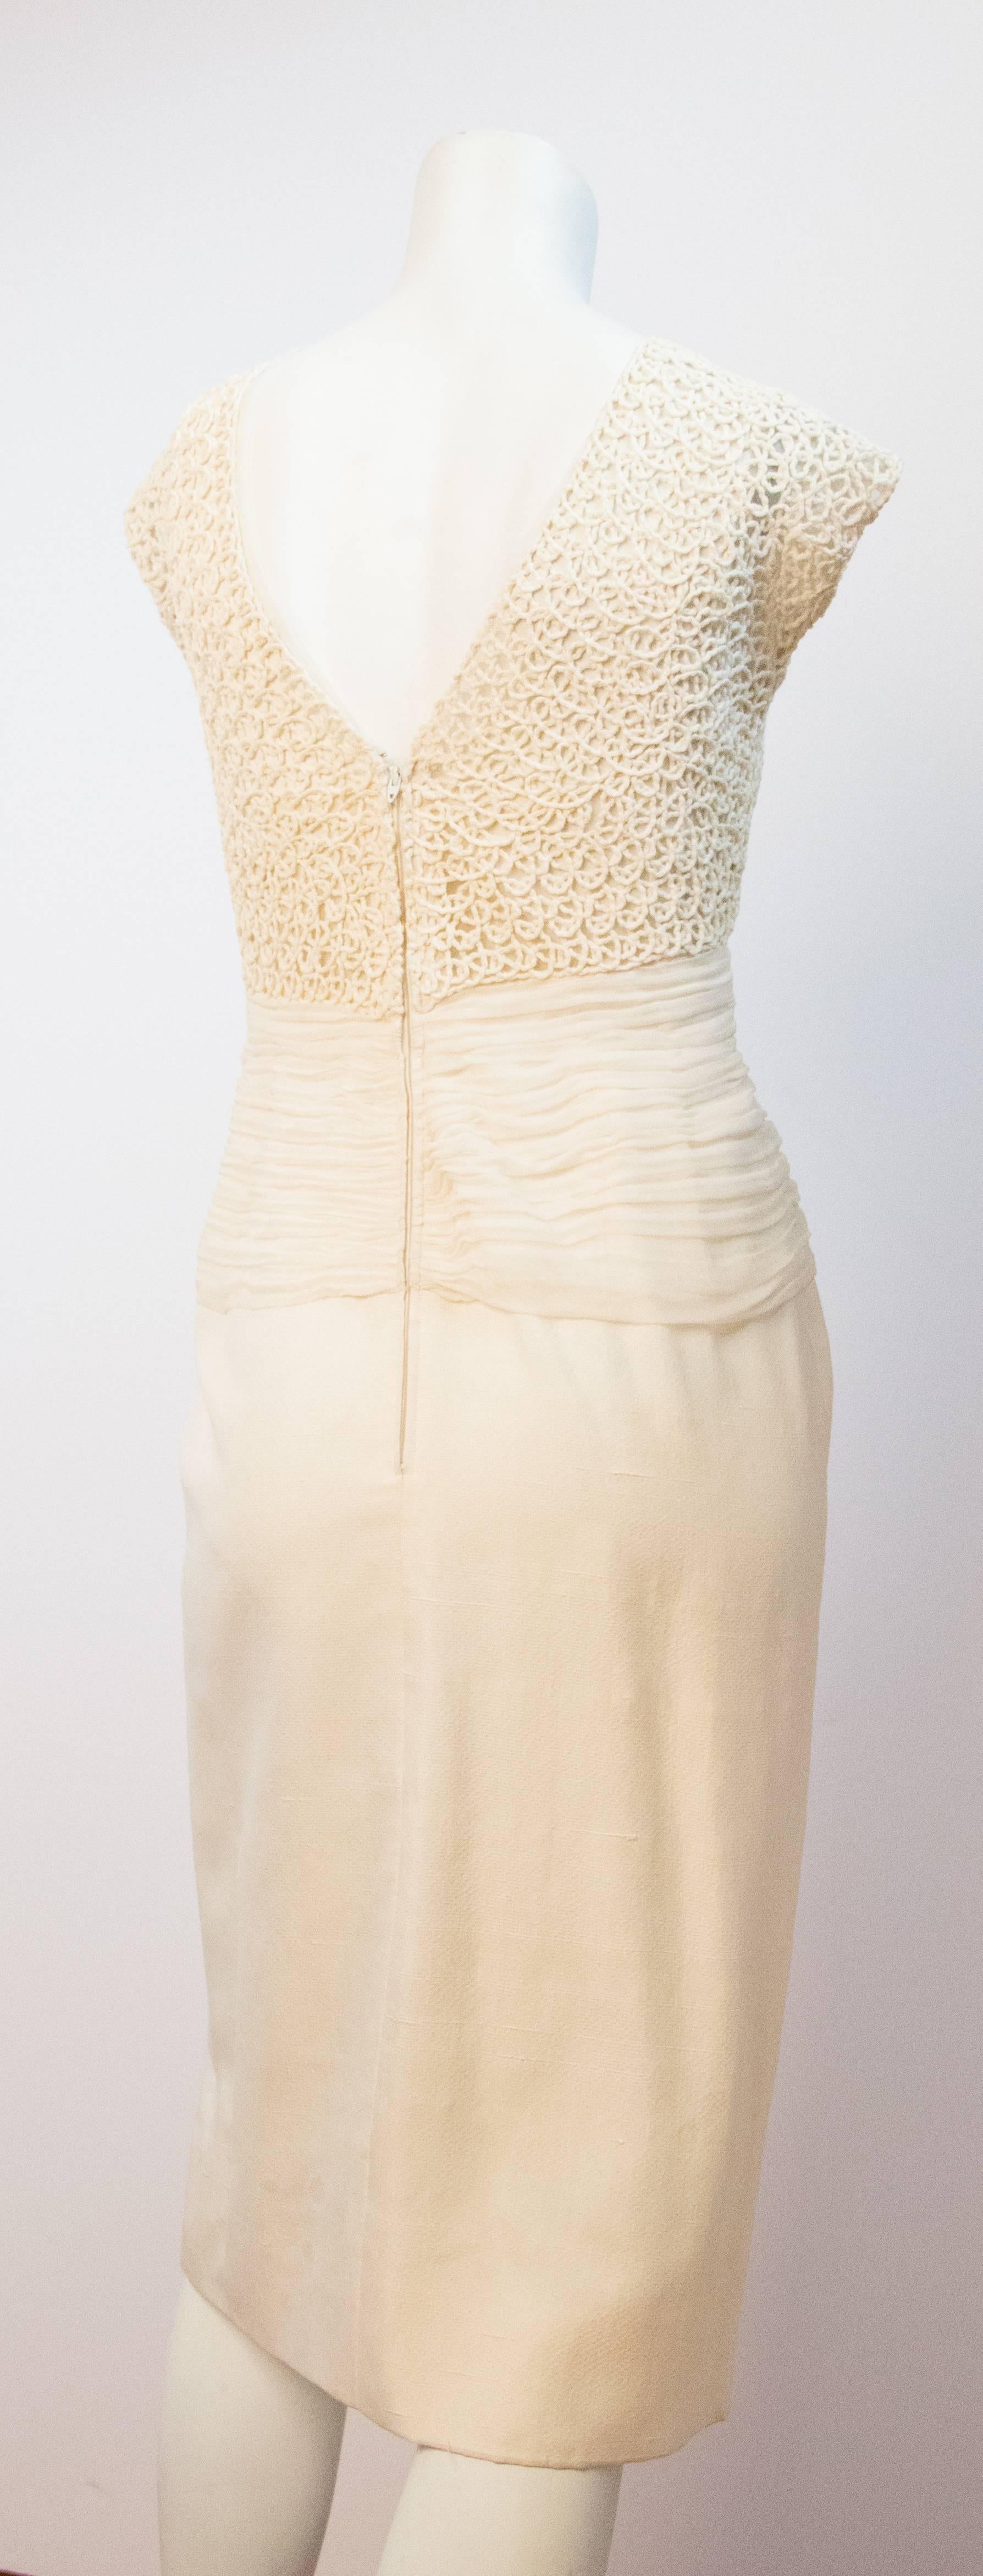 60s cream silk sheath with silk chiffon touching along the bodice. Ribbon type work makes up the upper bodice and sleeve of the dress. Nylon zipper up the back. Filly lined in organza and mesh. 

